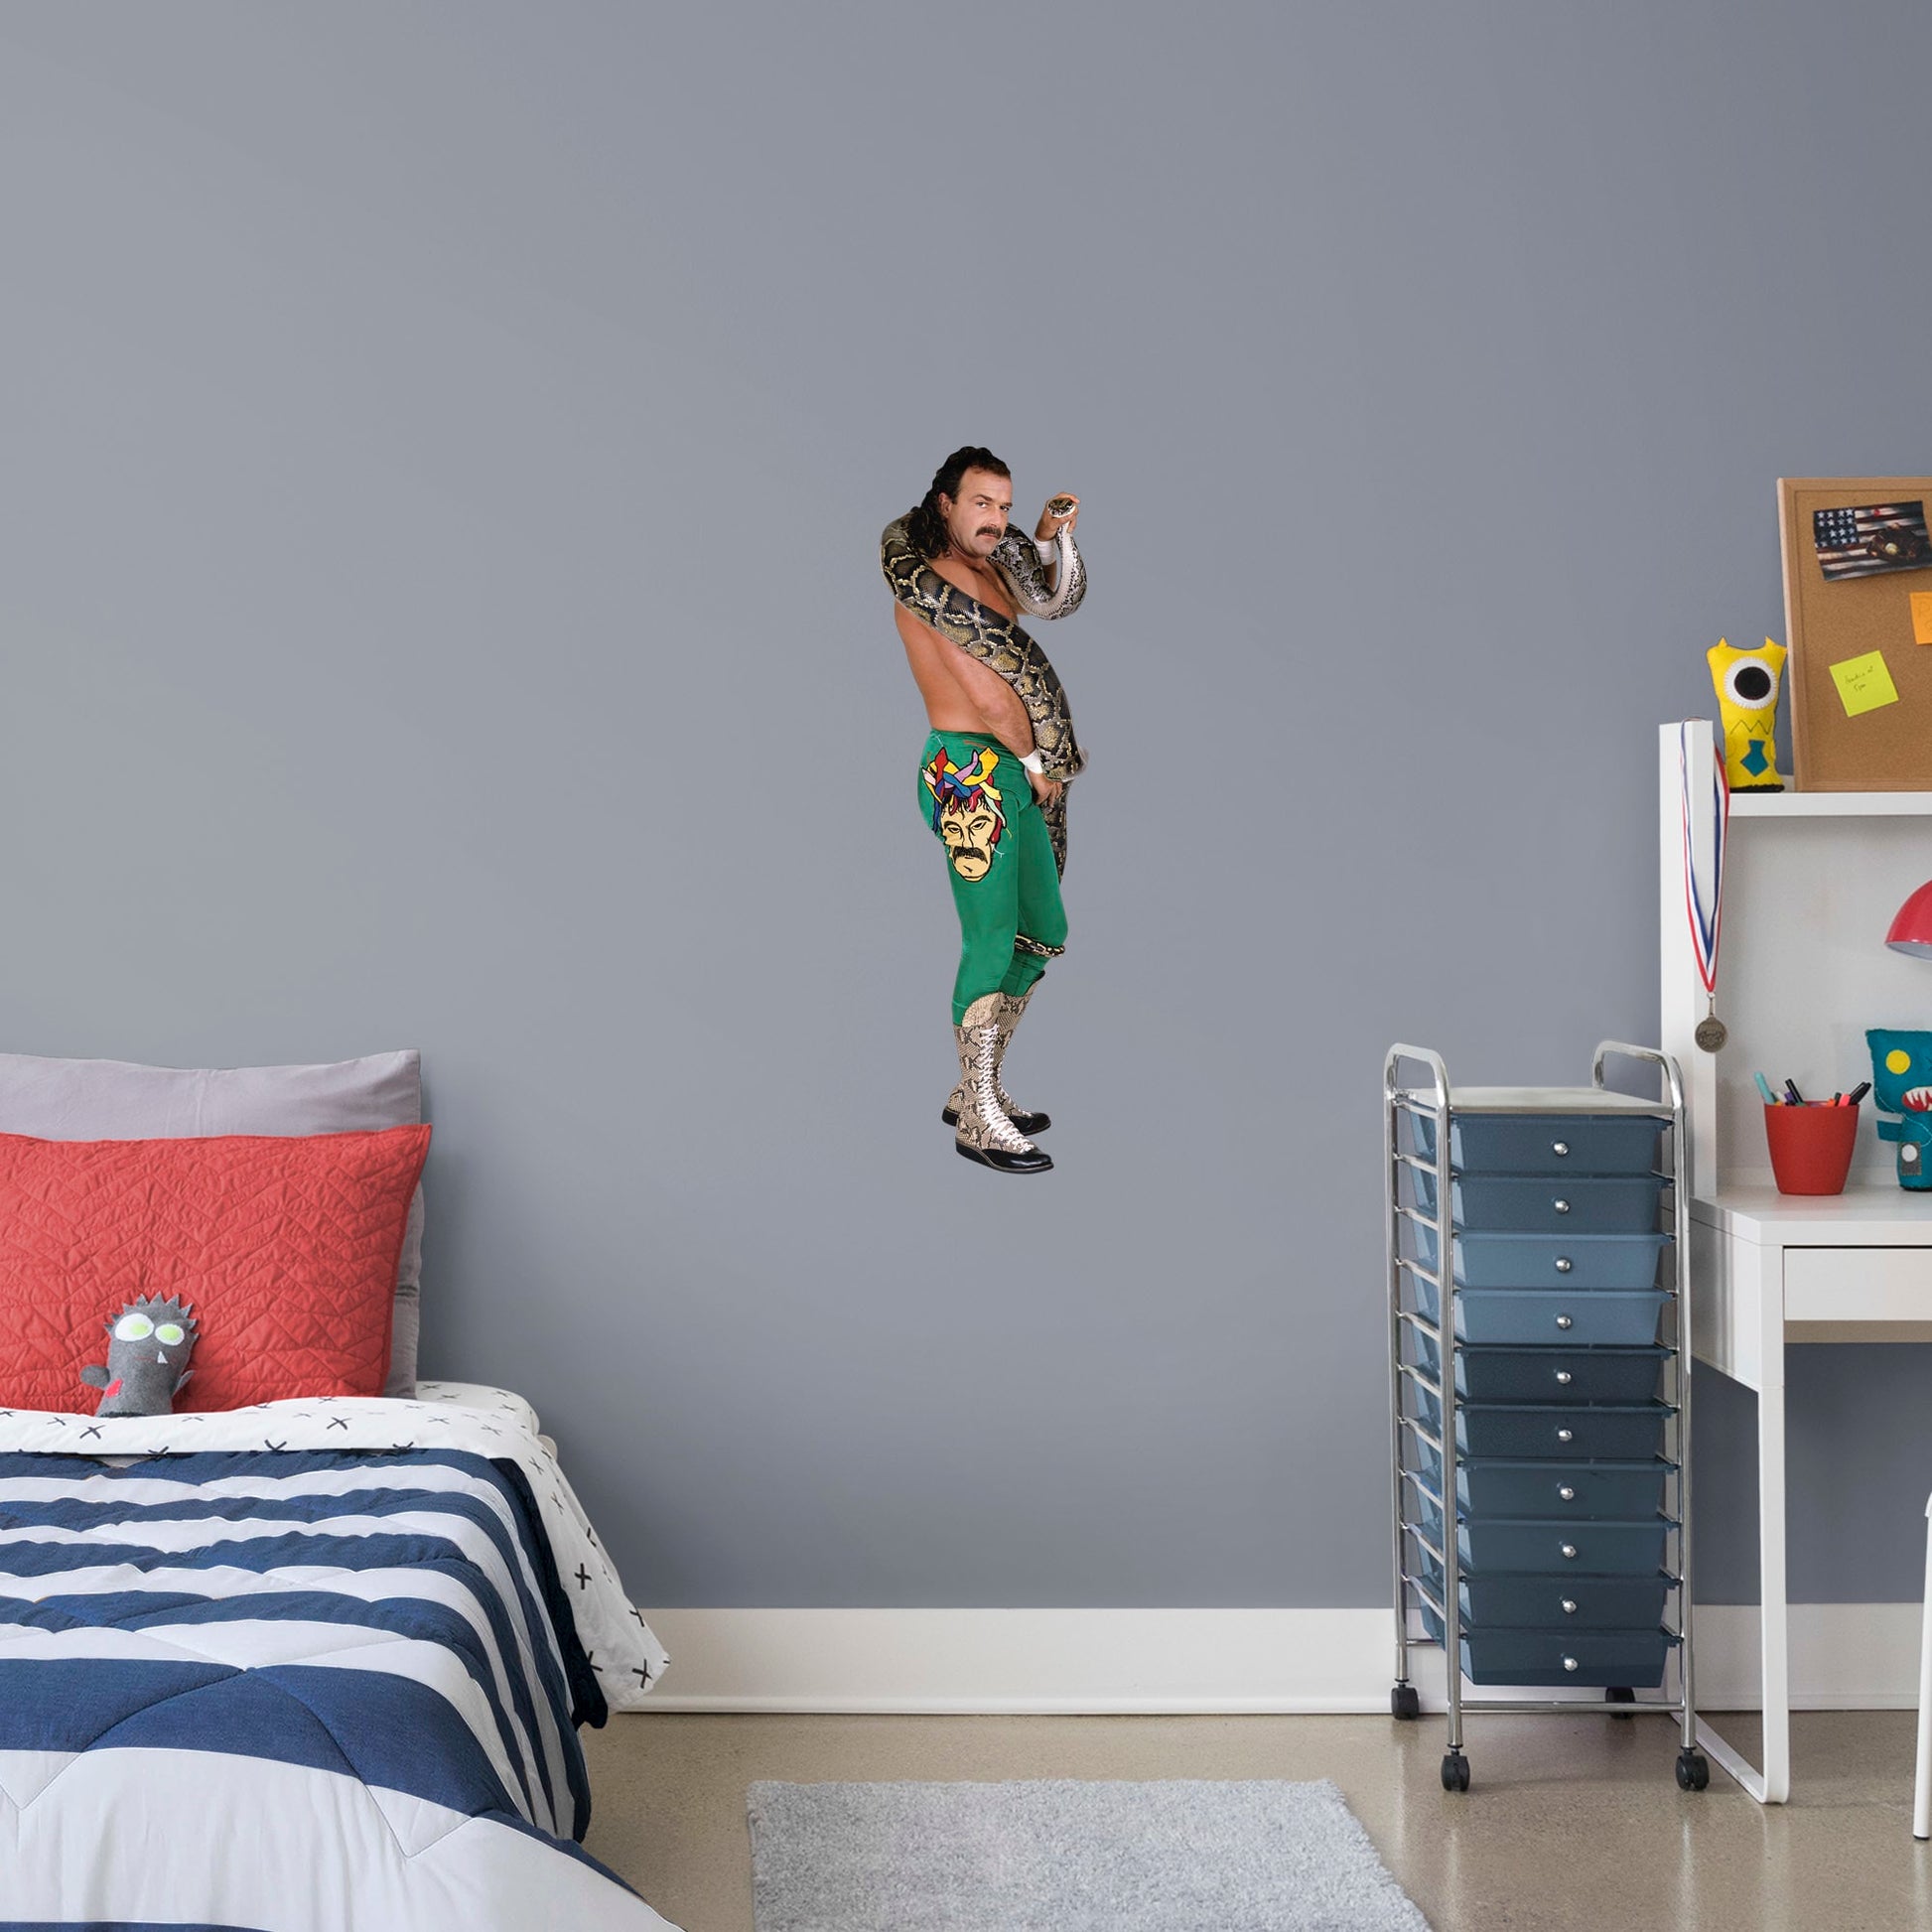 Life-Size Superstar + 2 Decal (22"W x 78"H)